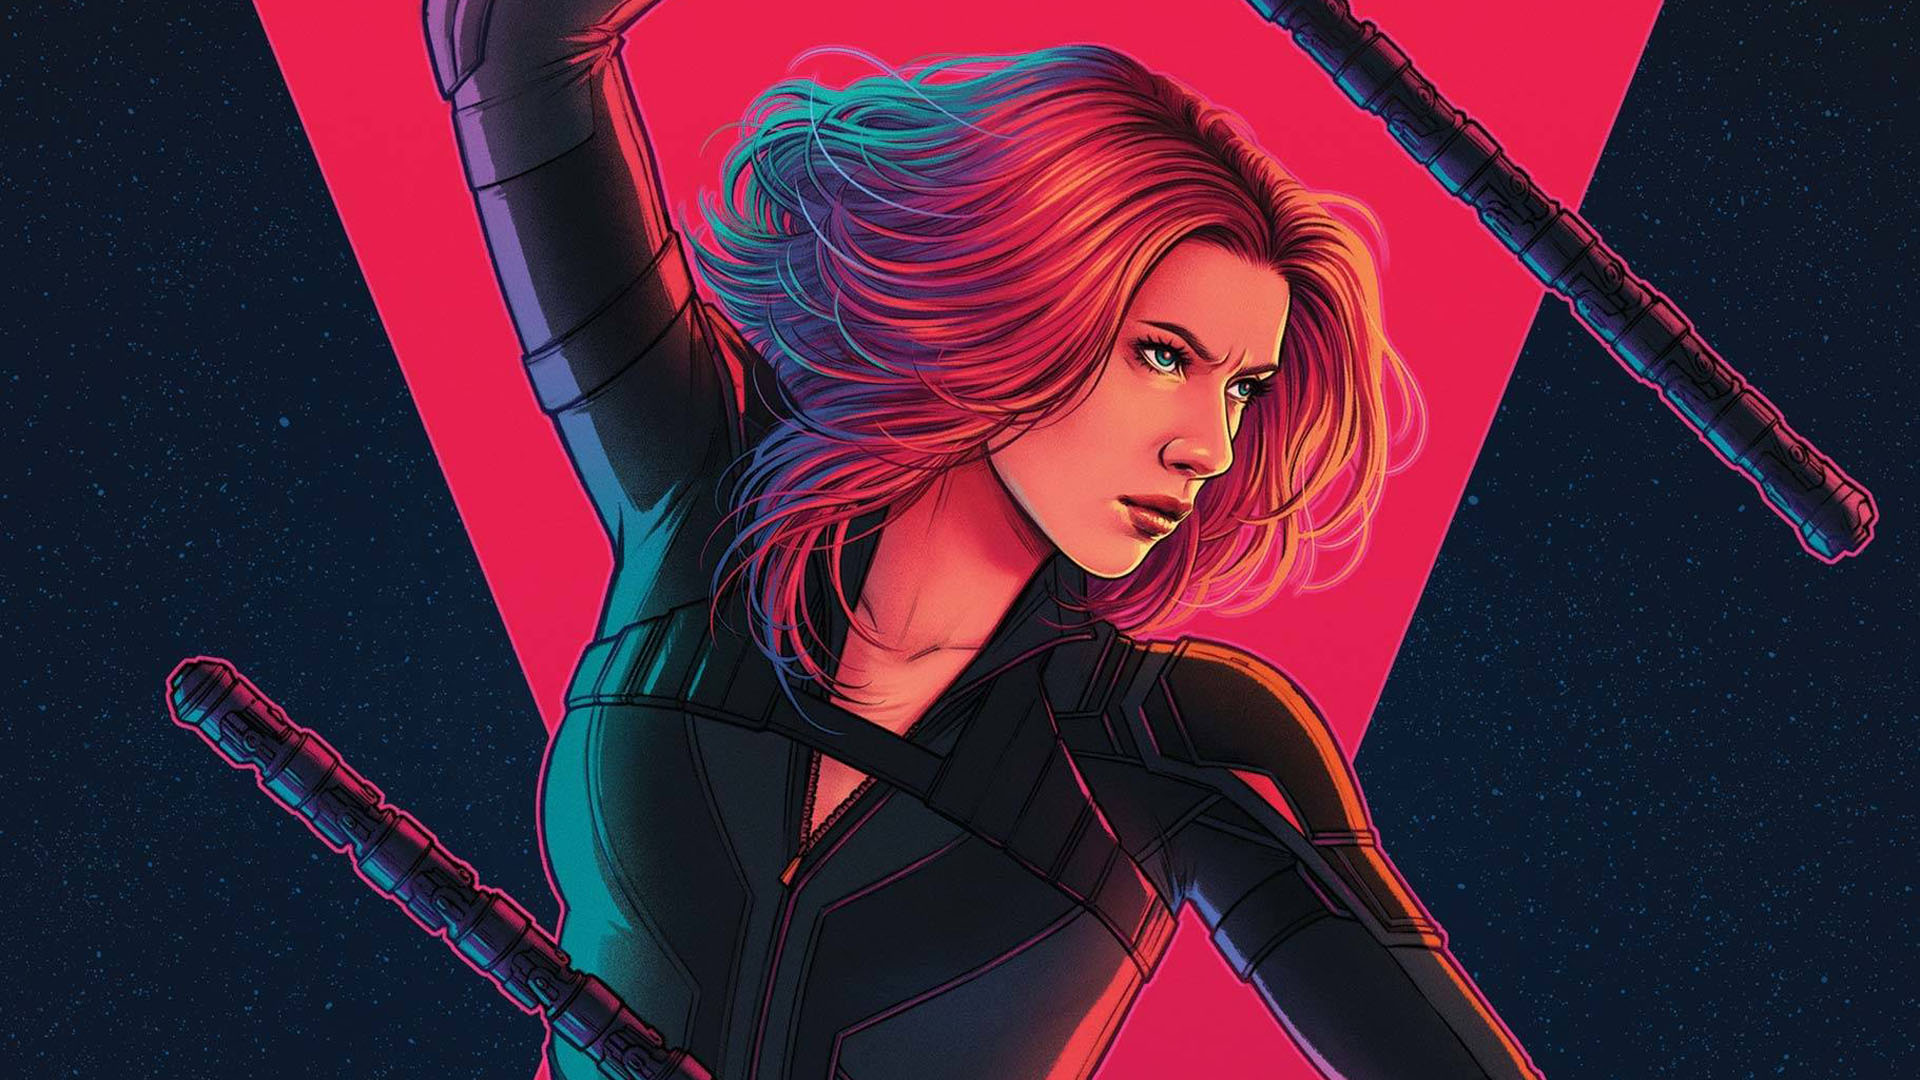 The 10 greatest combat styles include Black Widow, who has become one of the most feared women on the face of the planet with her combat mastery.